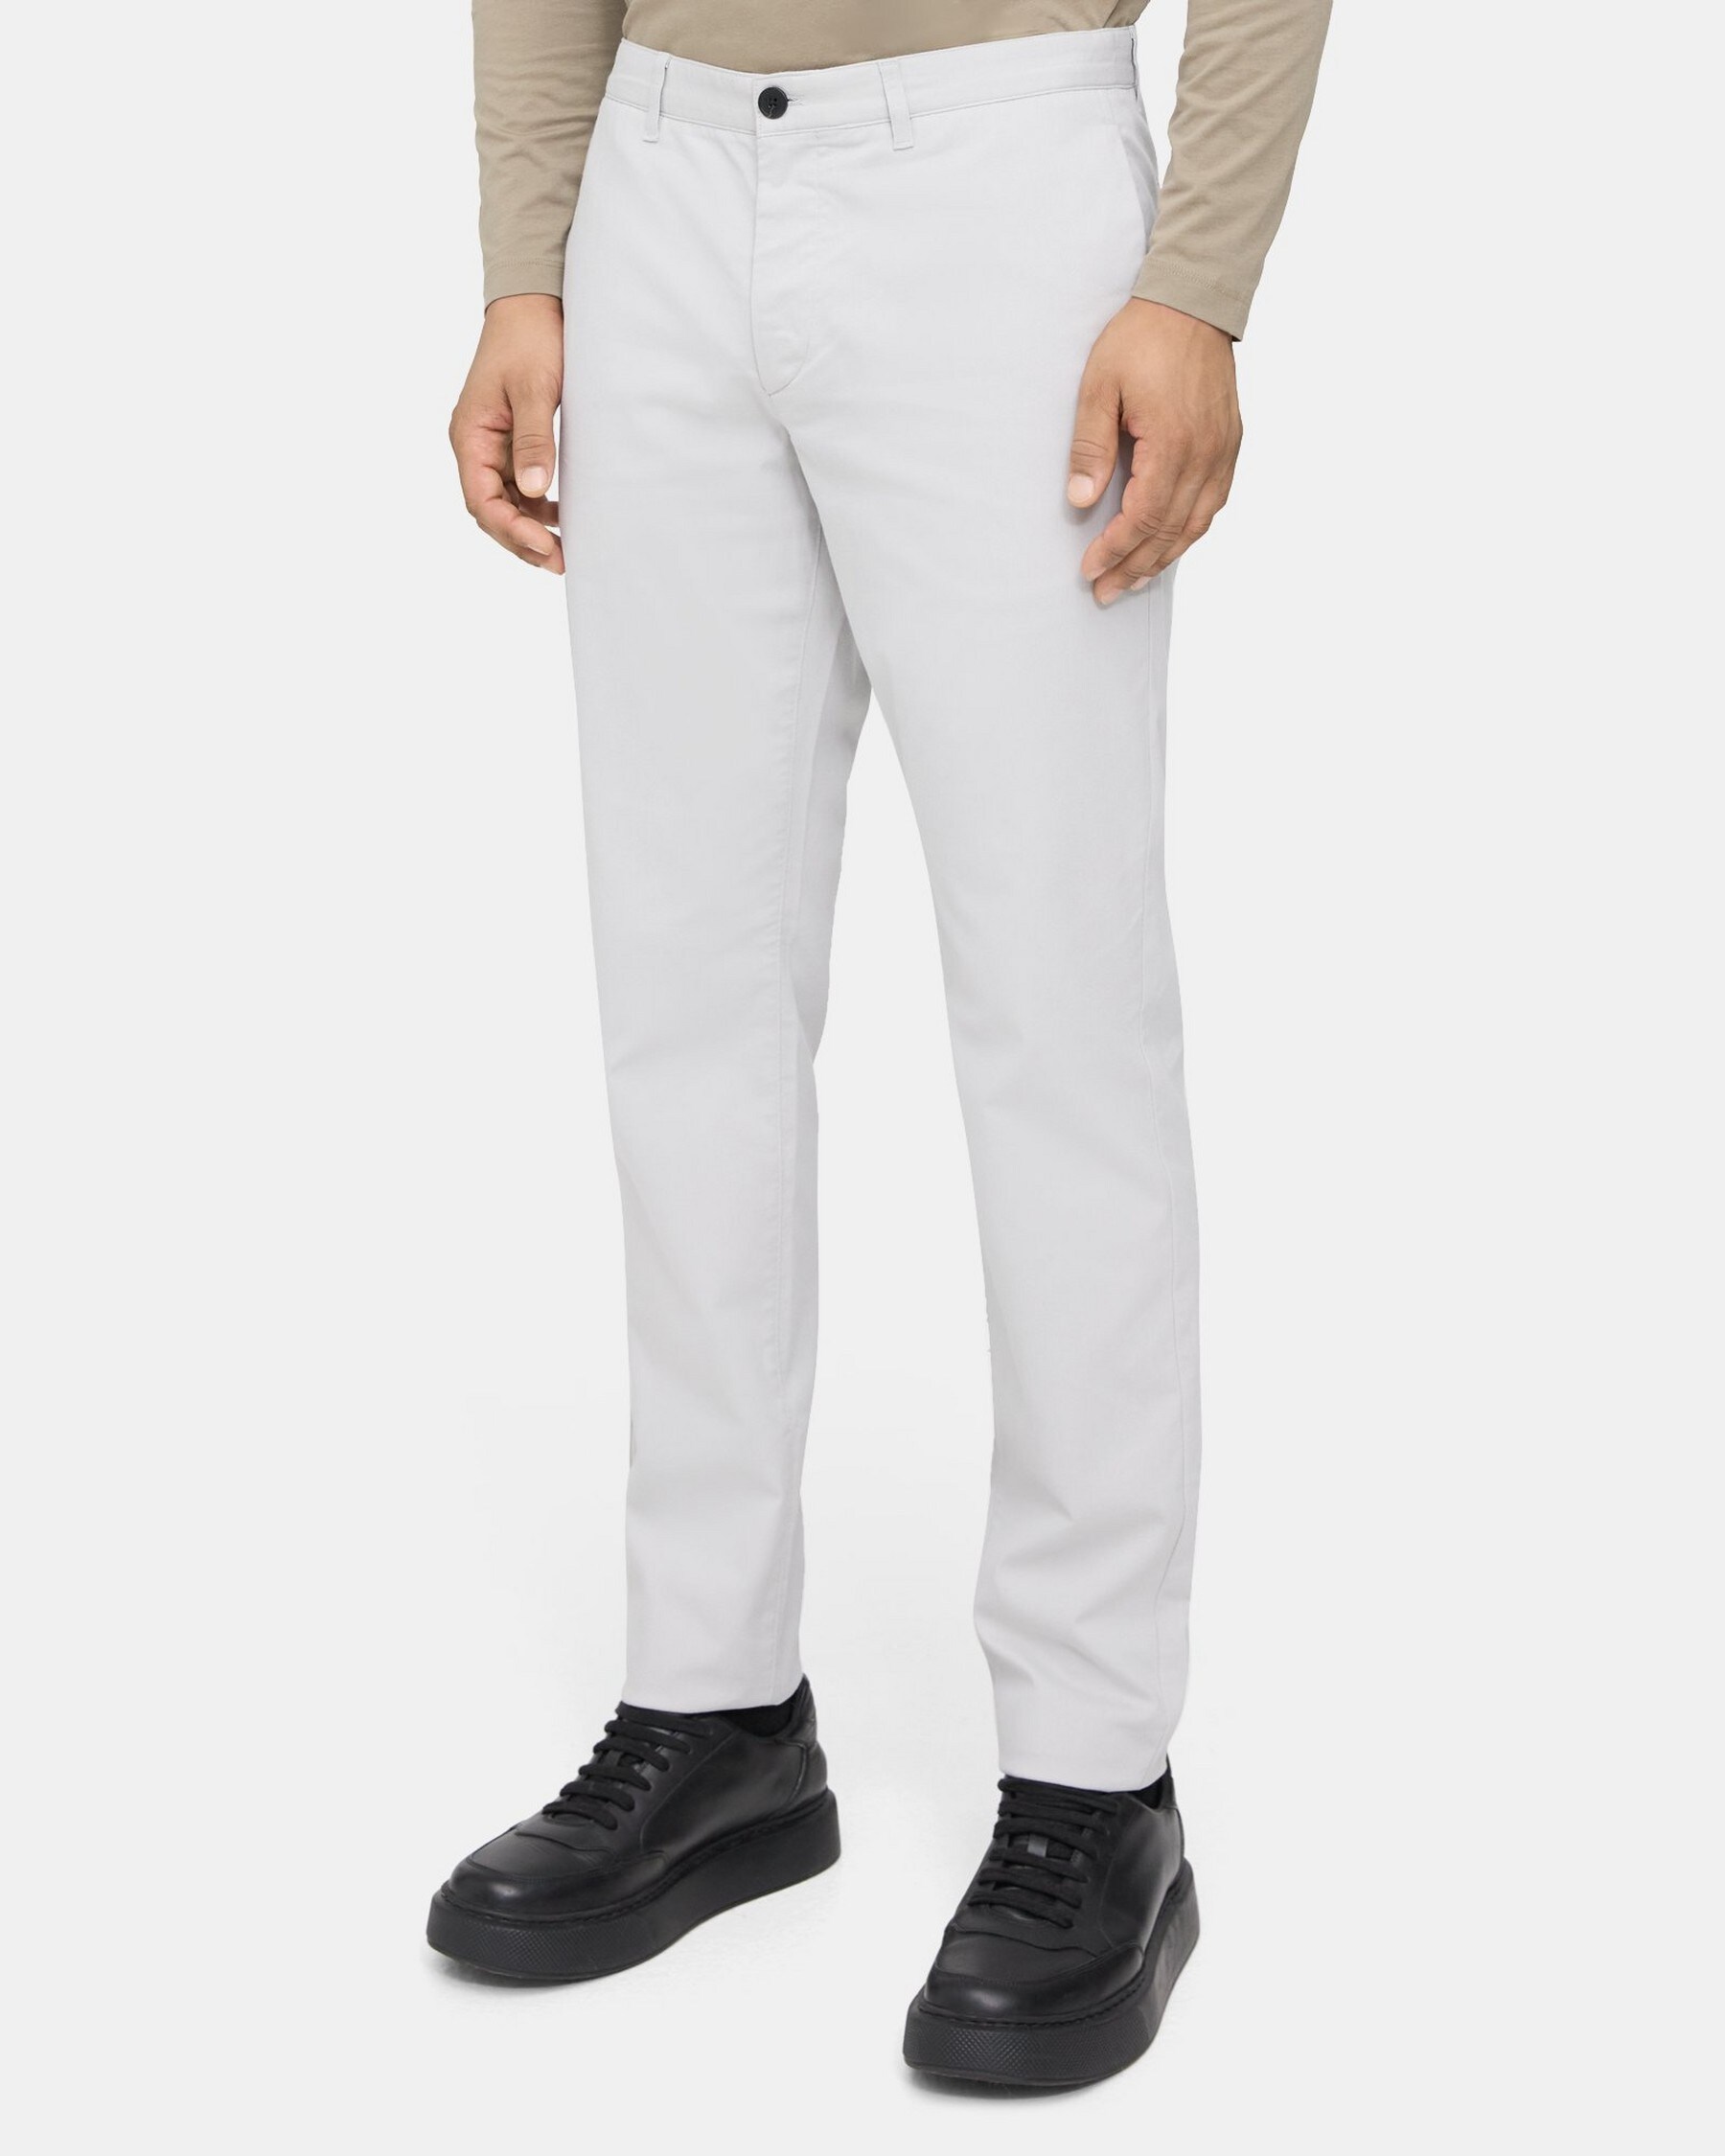 Classic-Fit Pant in Twill